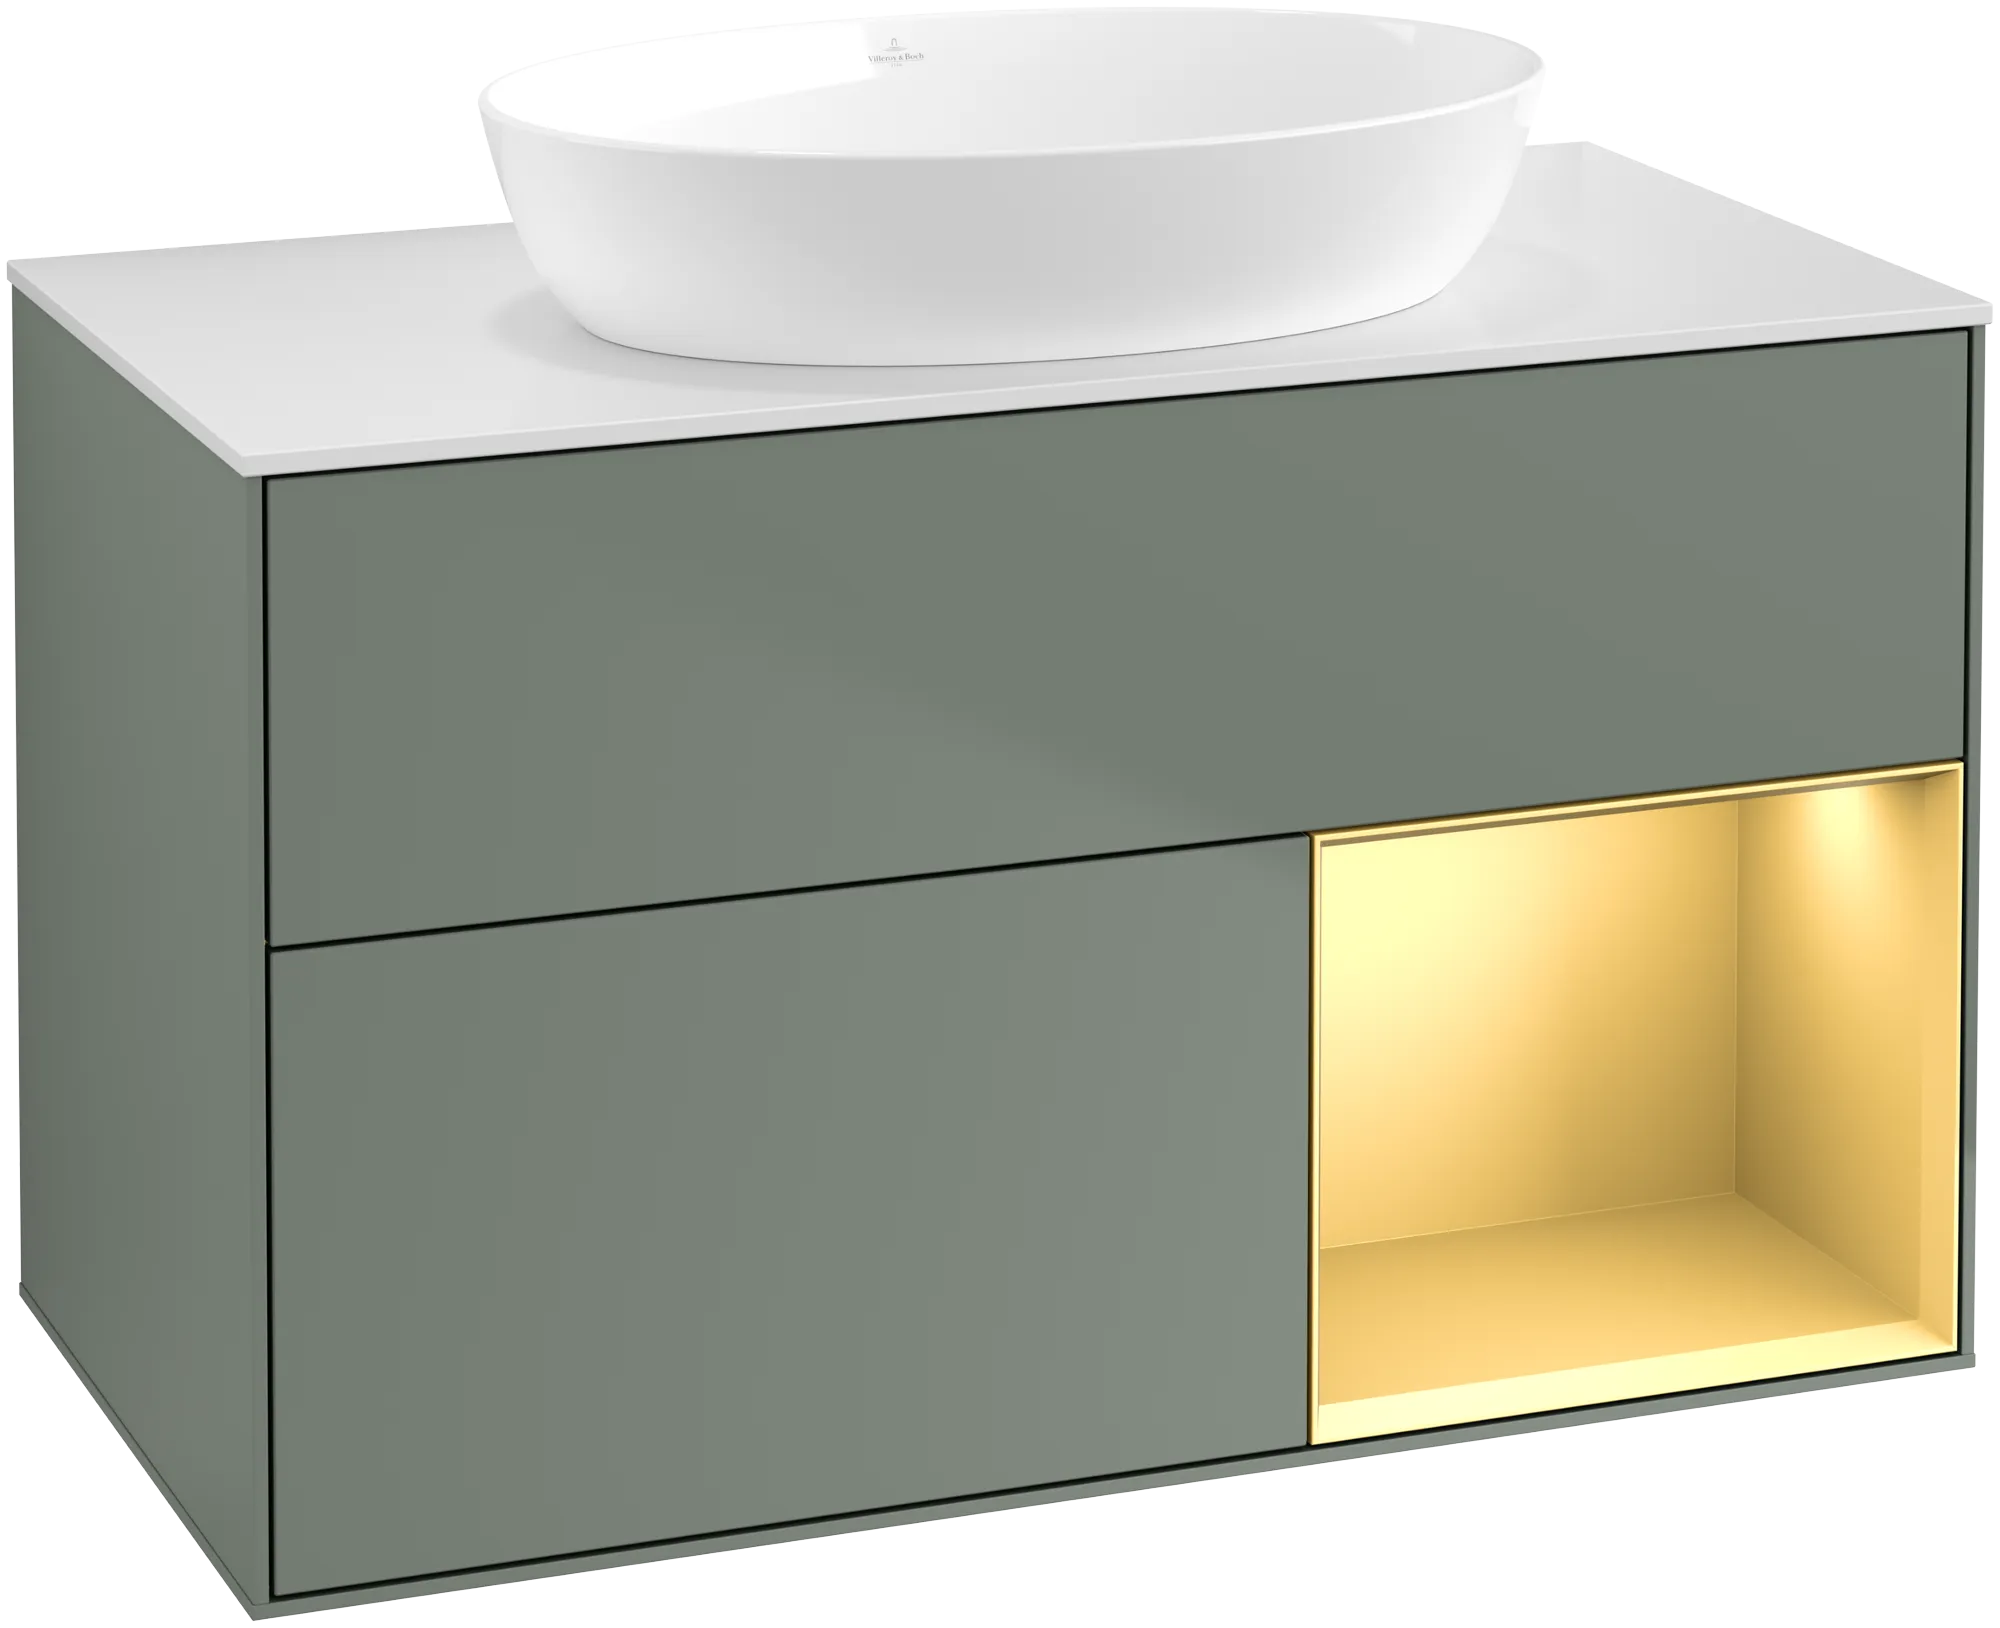 Picture of VILLEROY BOCH Finion Vanity unit, with lighting, 2 pull-out compartments, 1000 x 603 x 501 mm, Olive Matt Lacquer / Gold Matt Lacquer / Glass White Matt #GA21HFGM